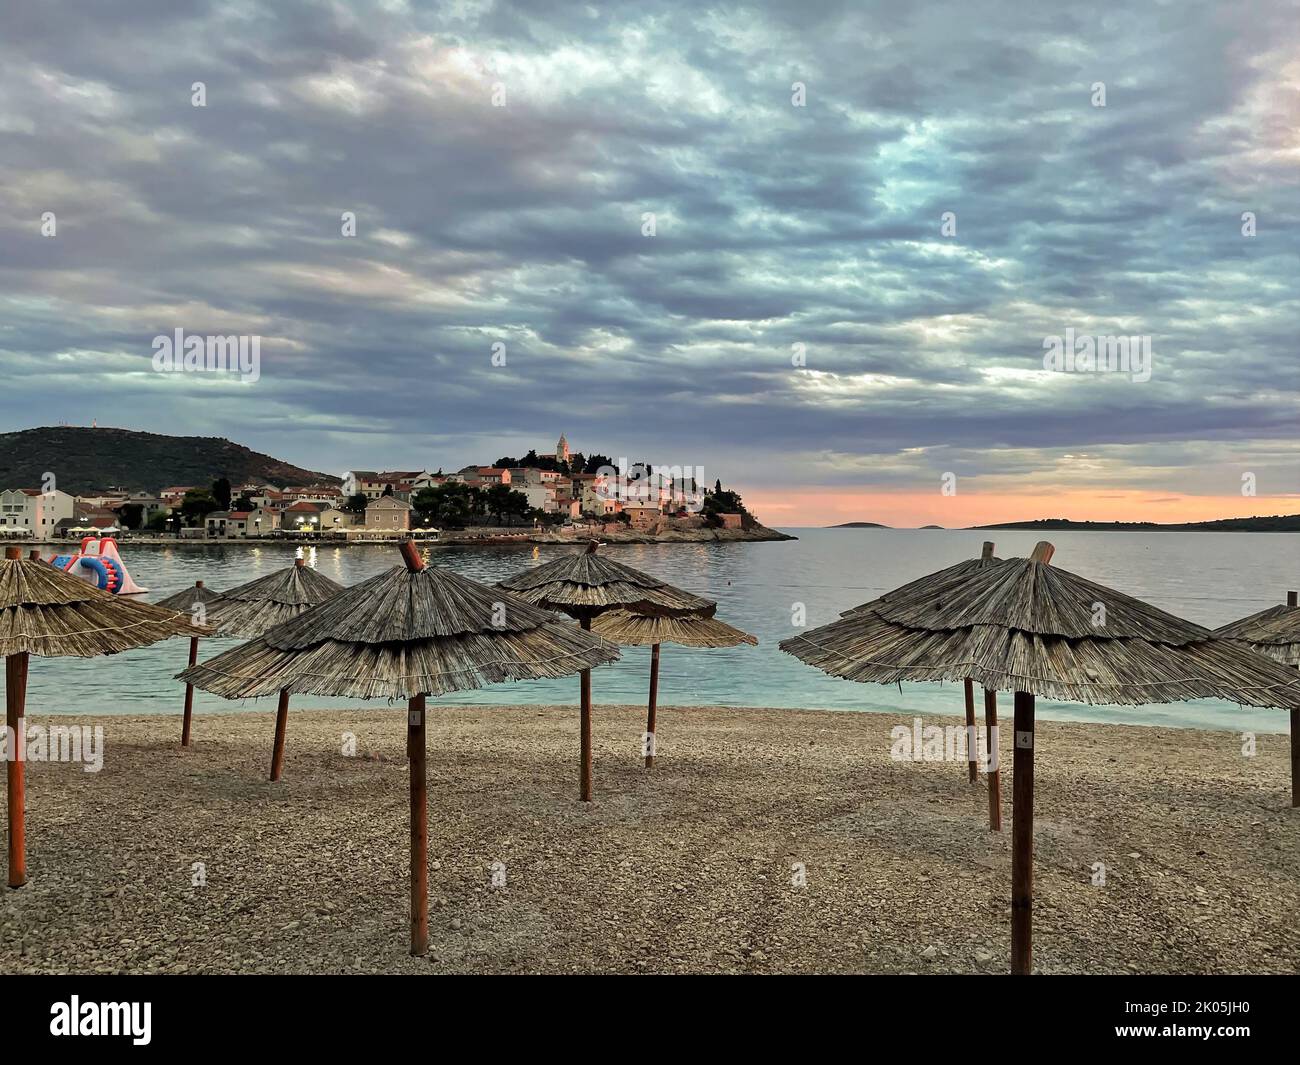 Cityscape of Mediterranean town from the pebble beach Stock Photo